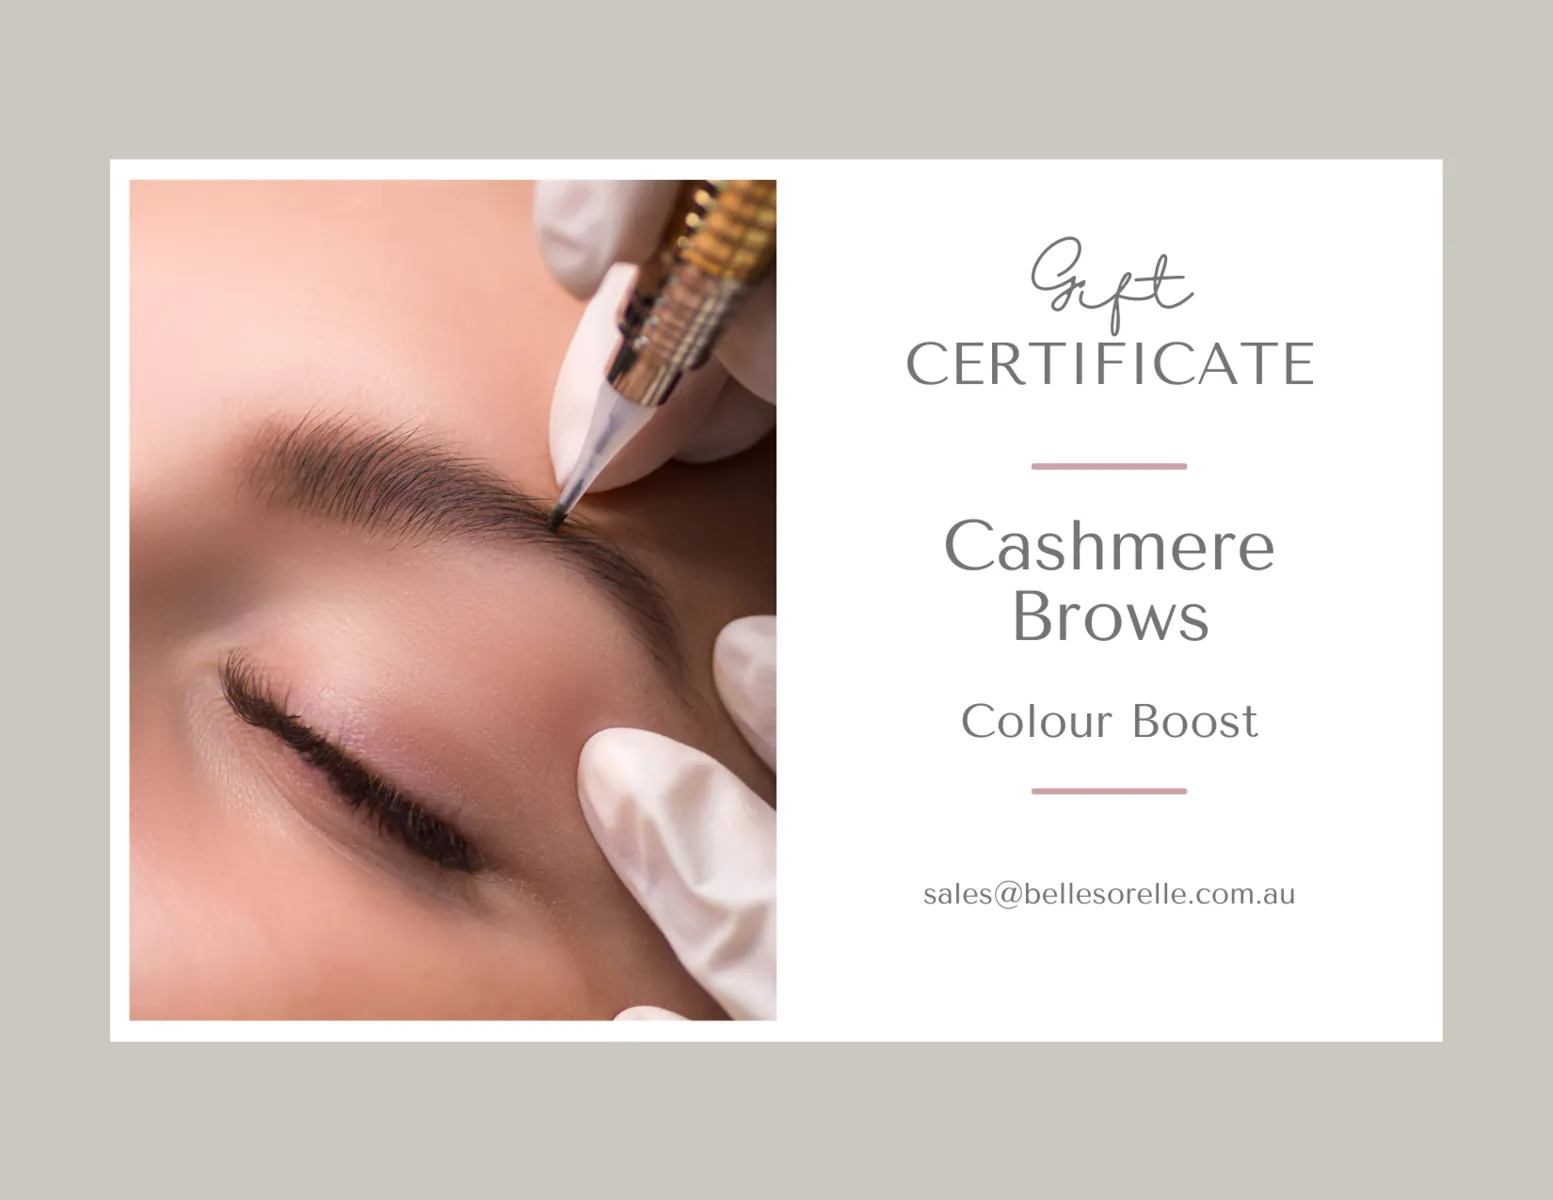 Cashmere Brows - 2 - 3 year Colour Boost